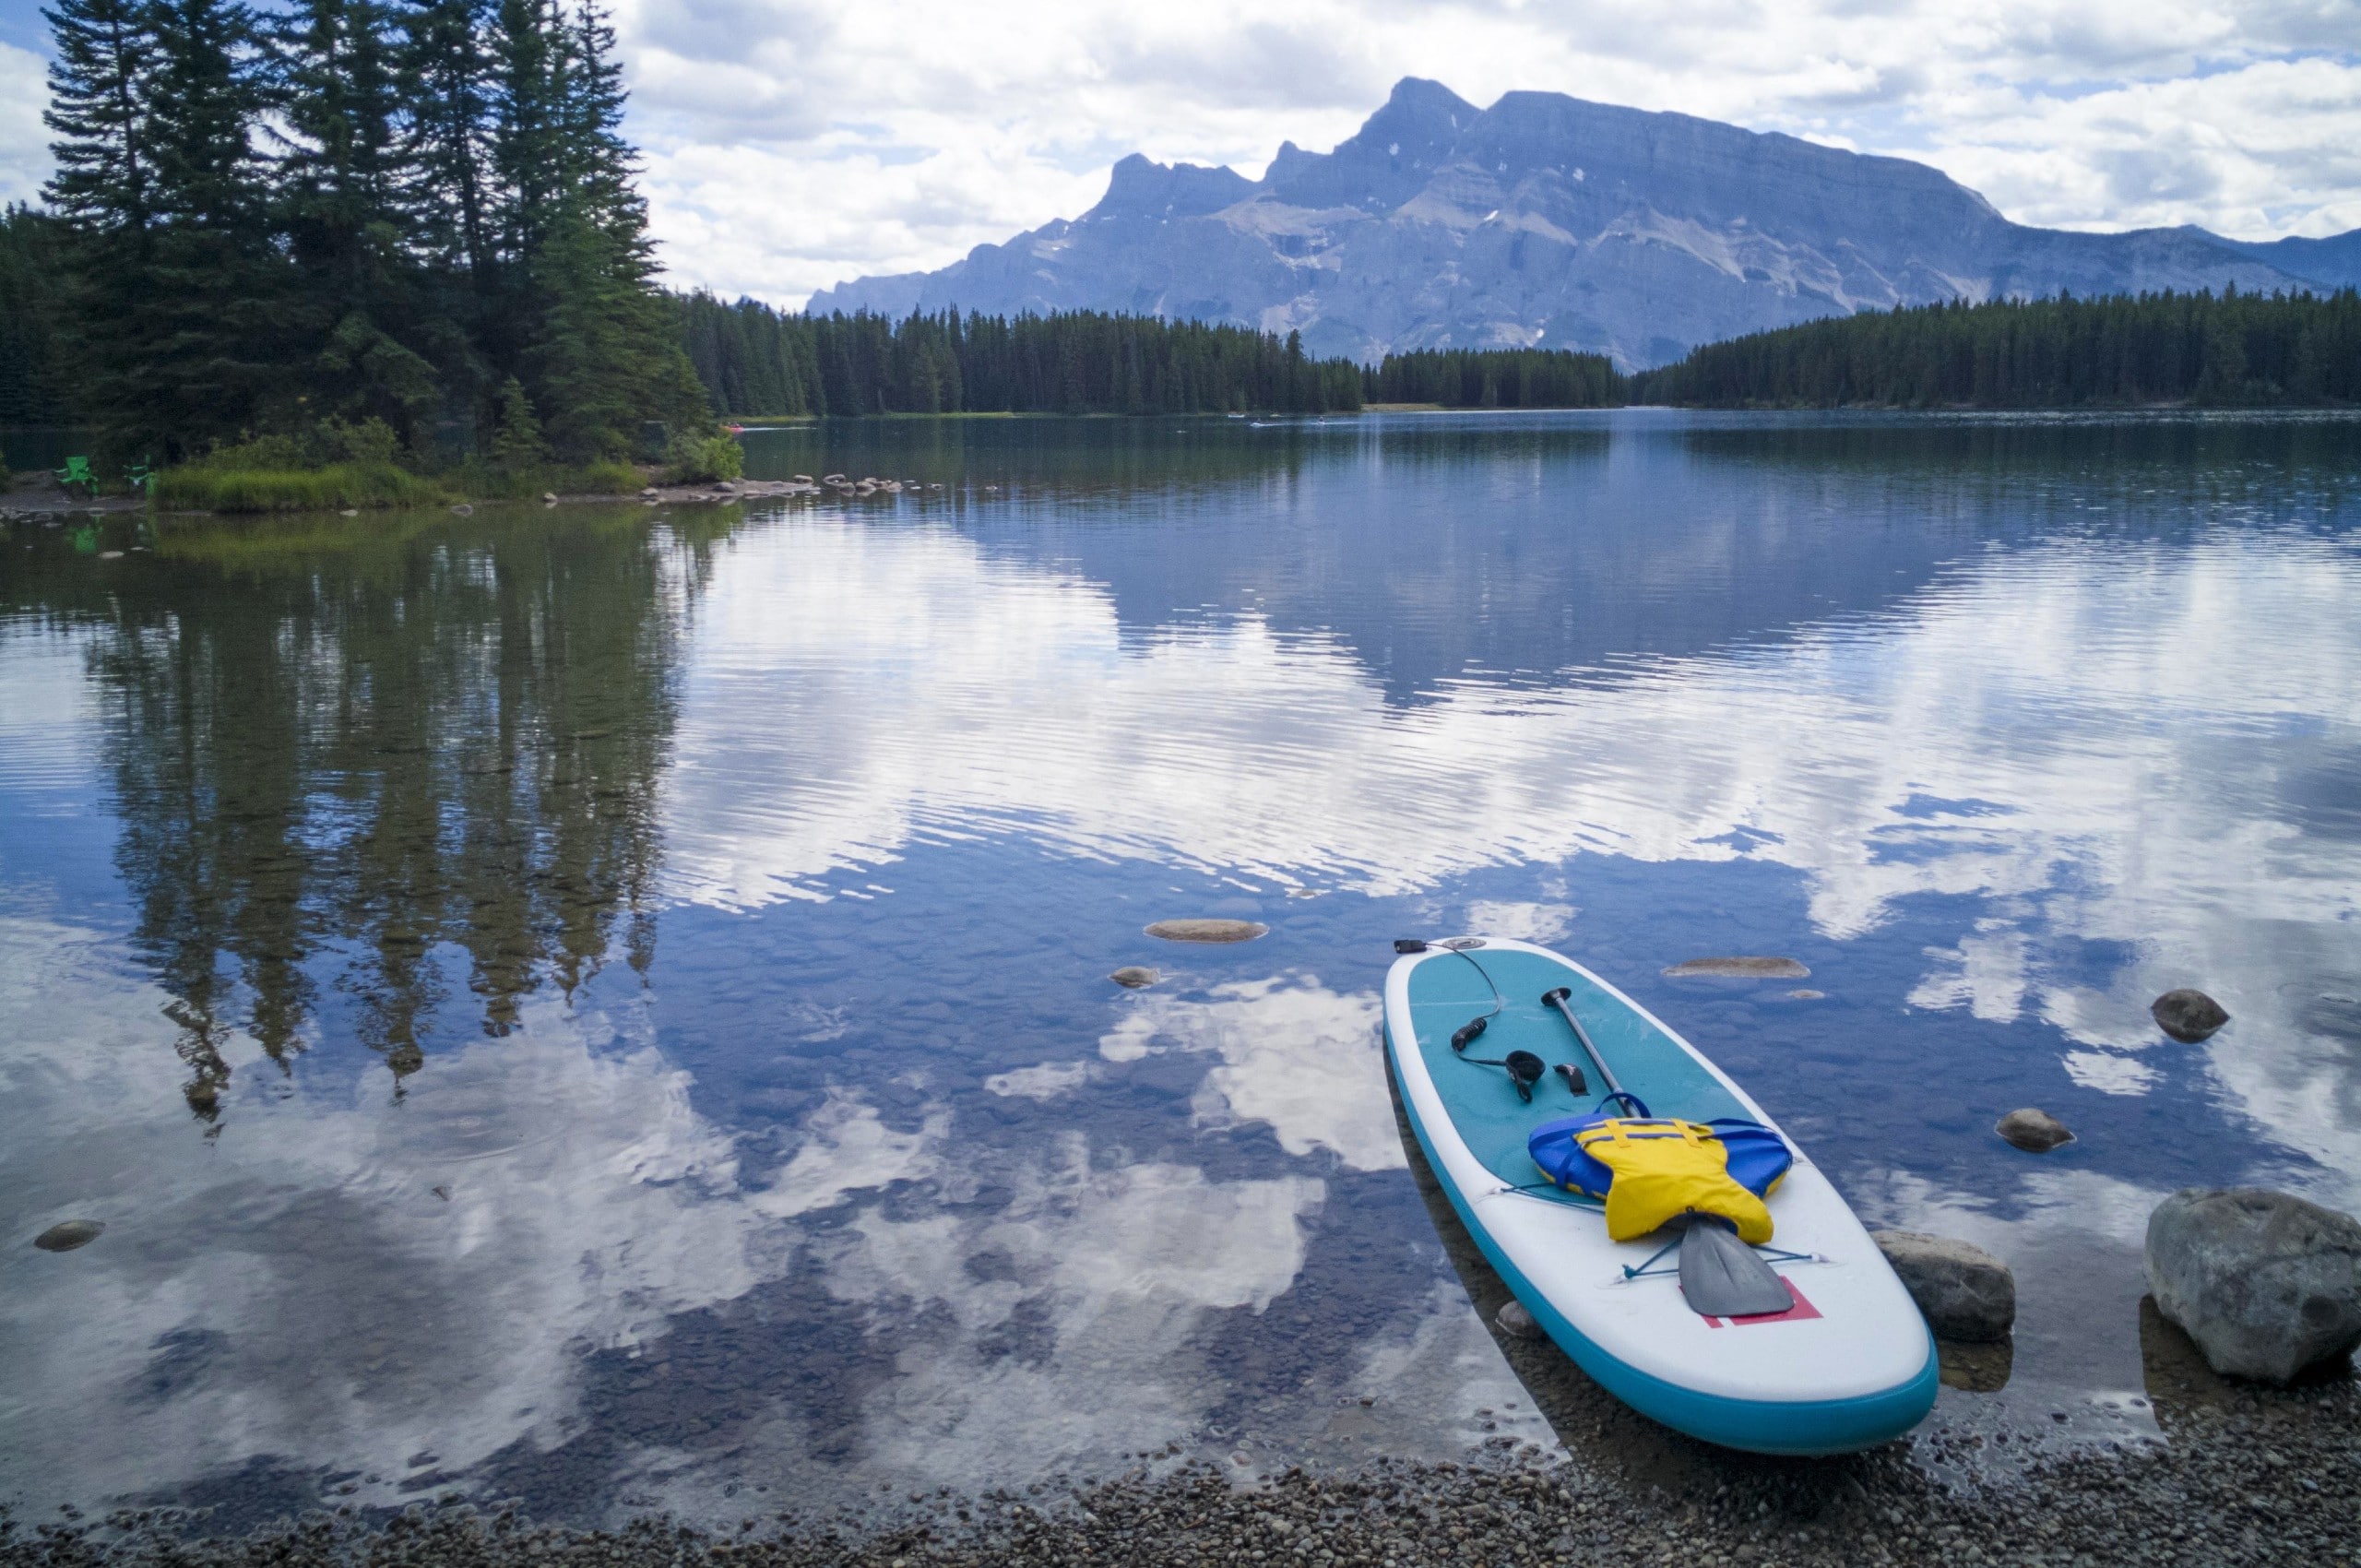 Paddling in the Two Jack Lake near Banff is a very rewarding experience